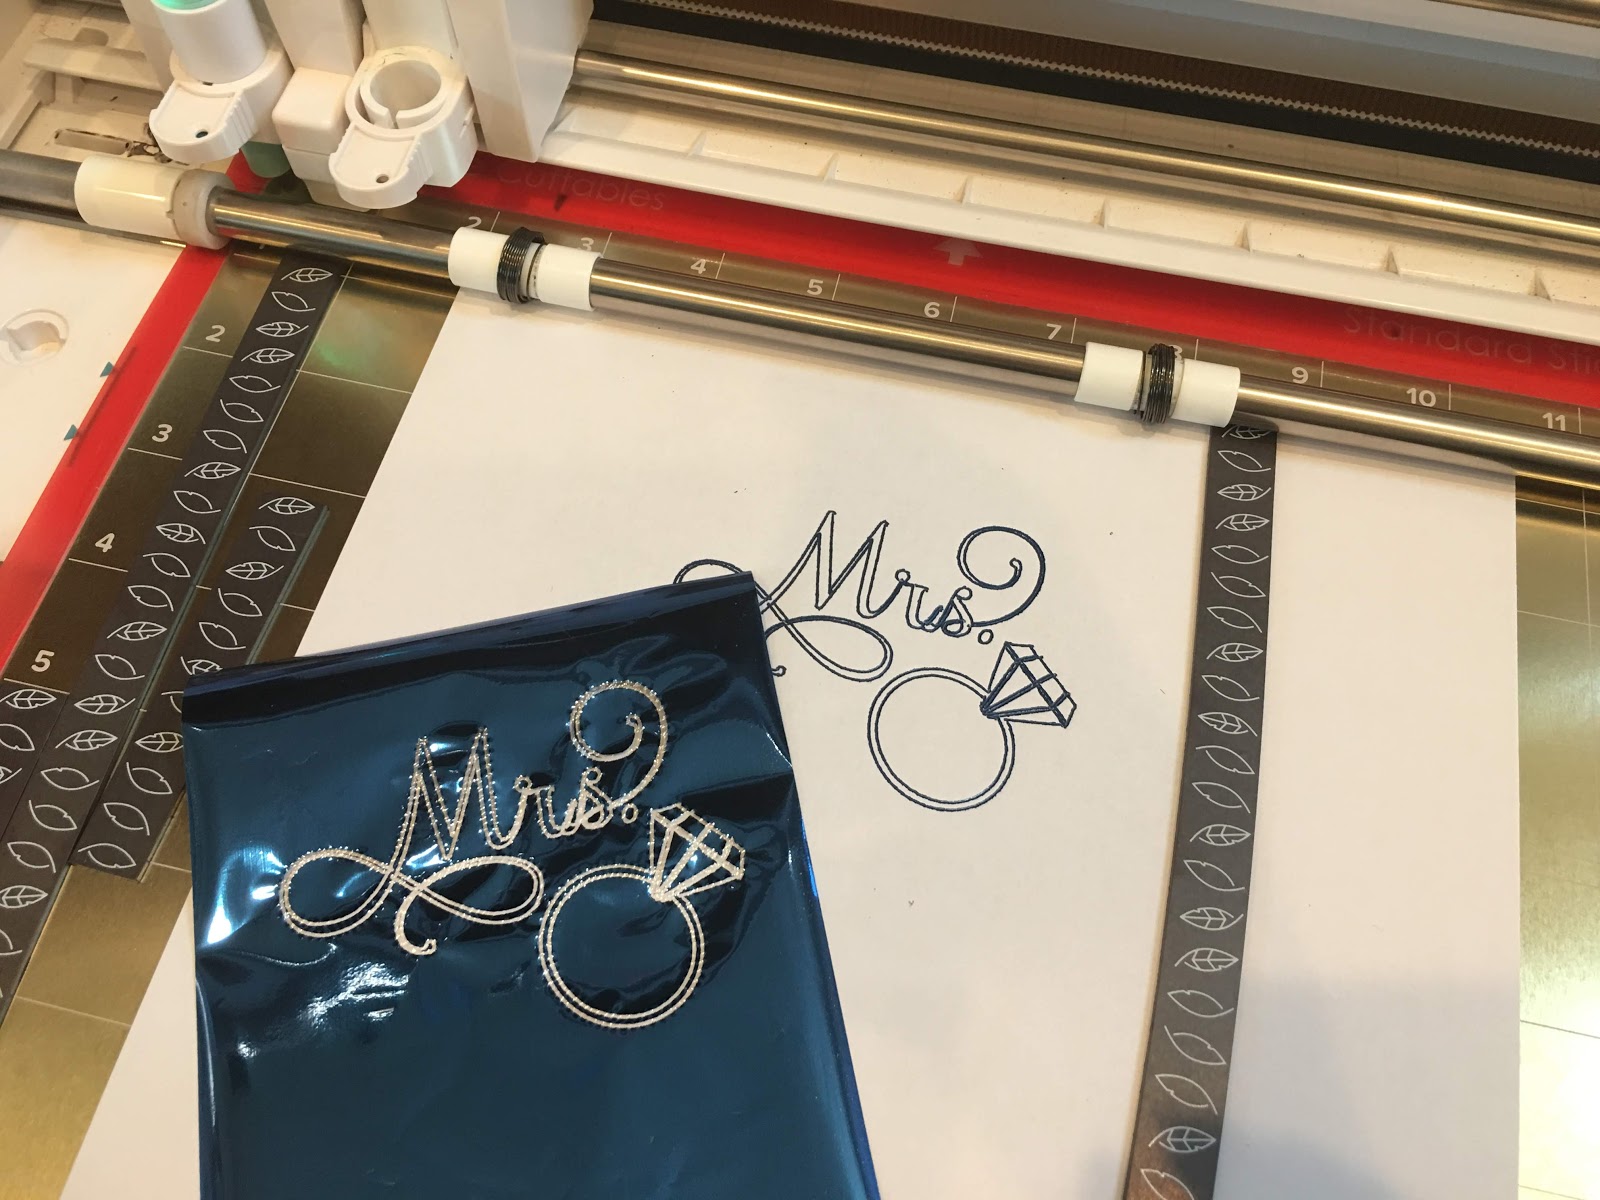 Foil Quill Magnetic Mat Board Review & Tutorial - Silhouette School